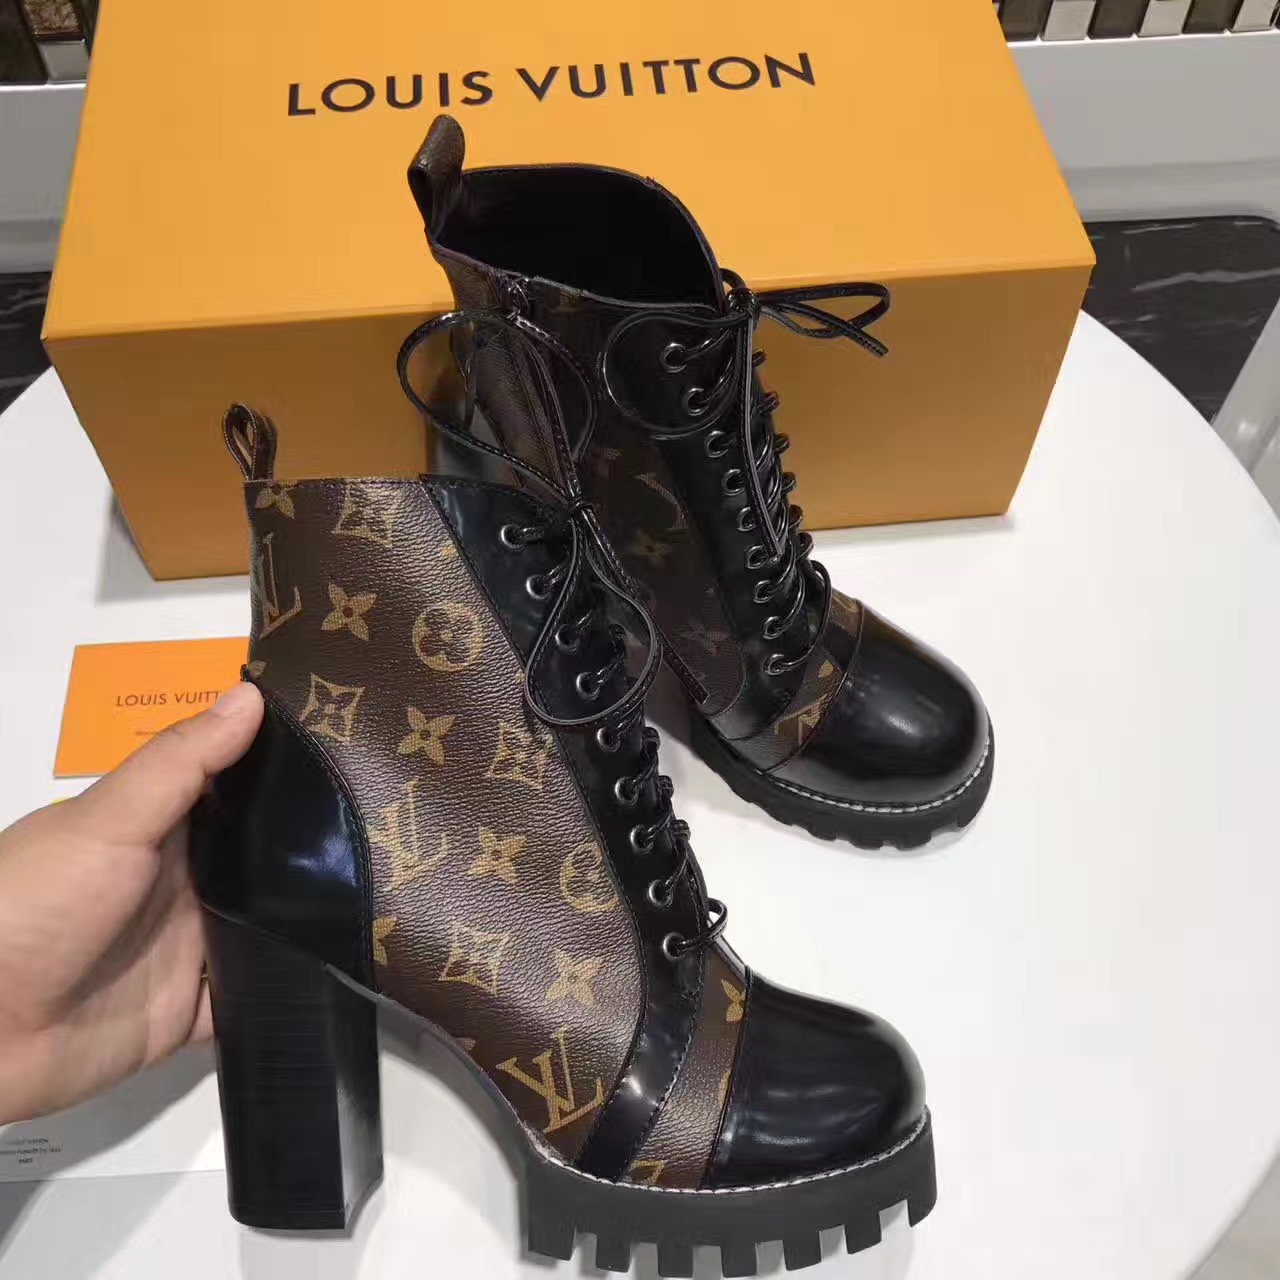 Compare prices for LV Hiking Ankle boot (1A5EZB) in official stores